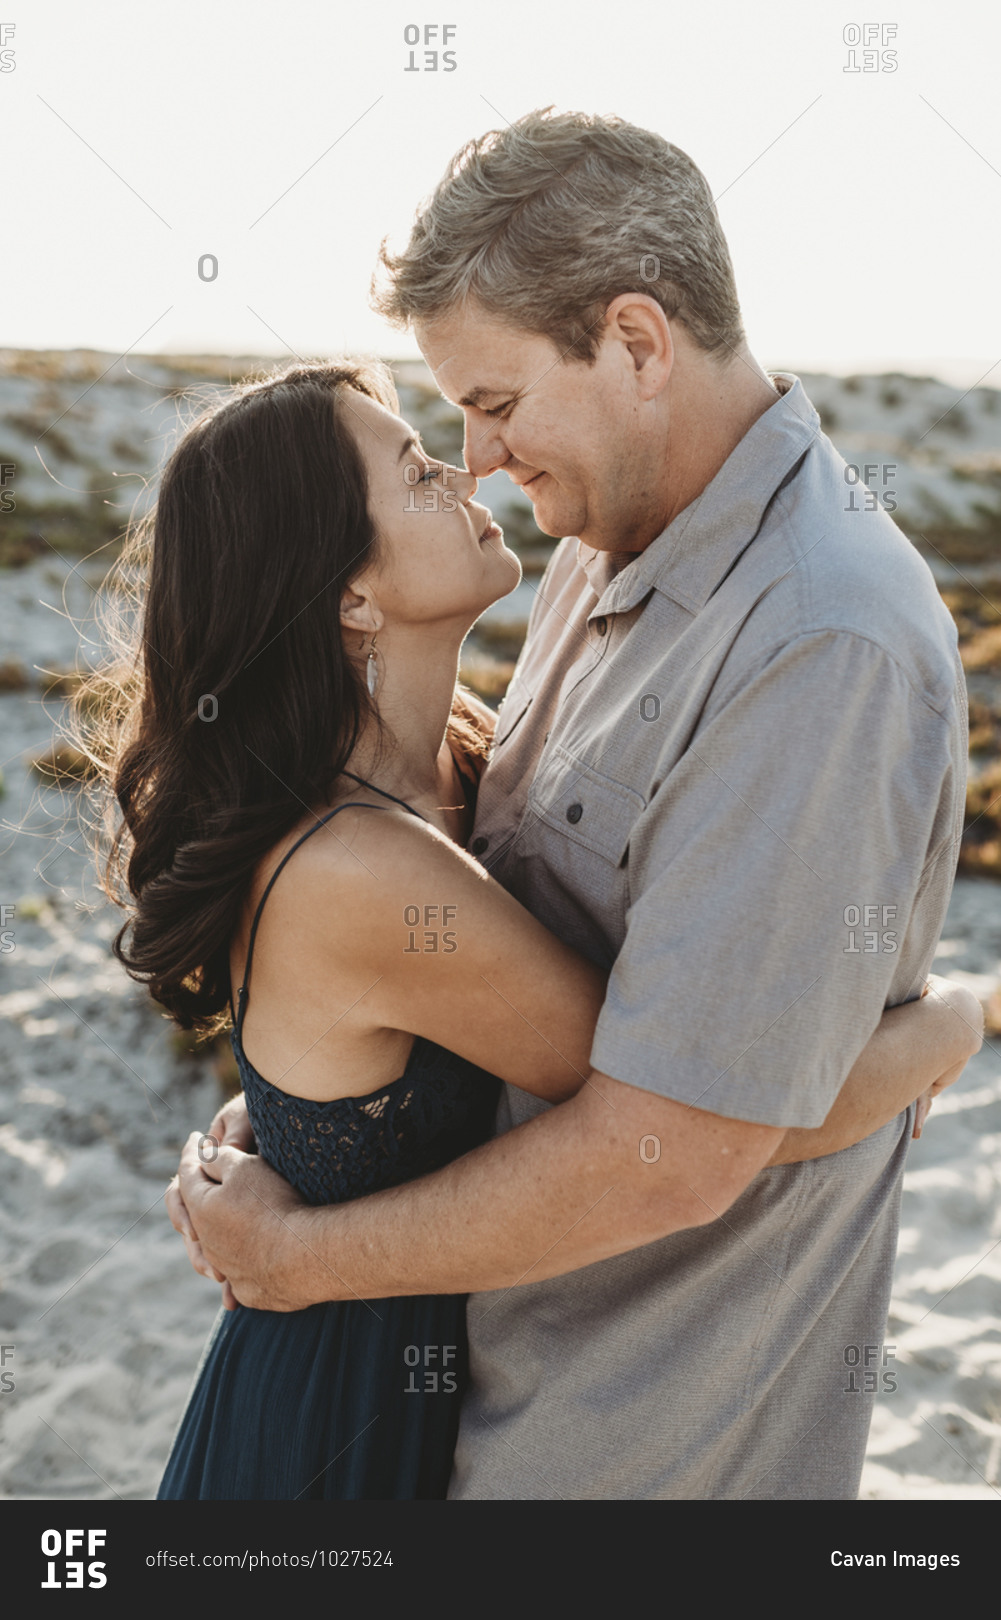 Mid-40's man and woman with closed eyes embracing and touching noses